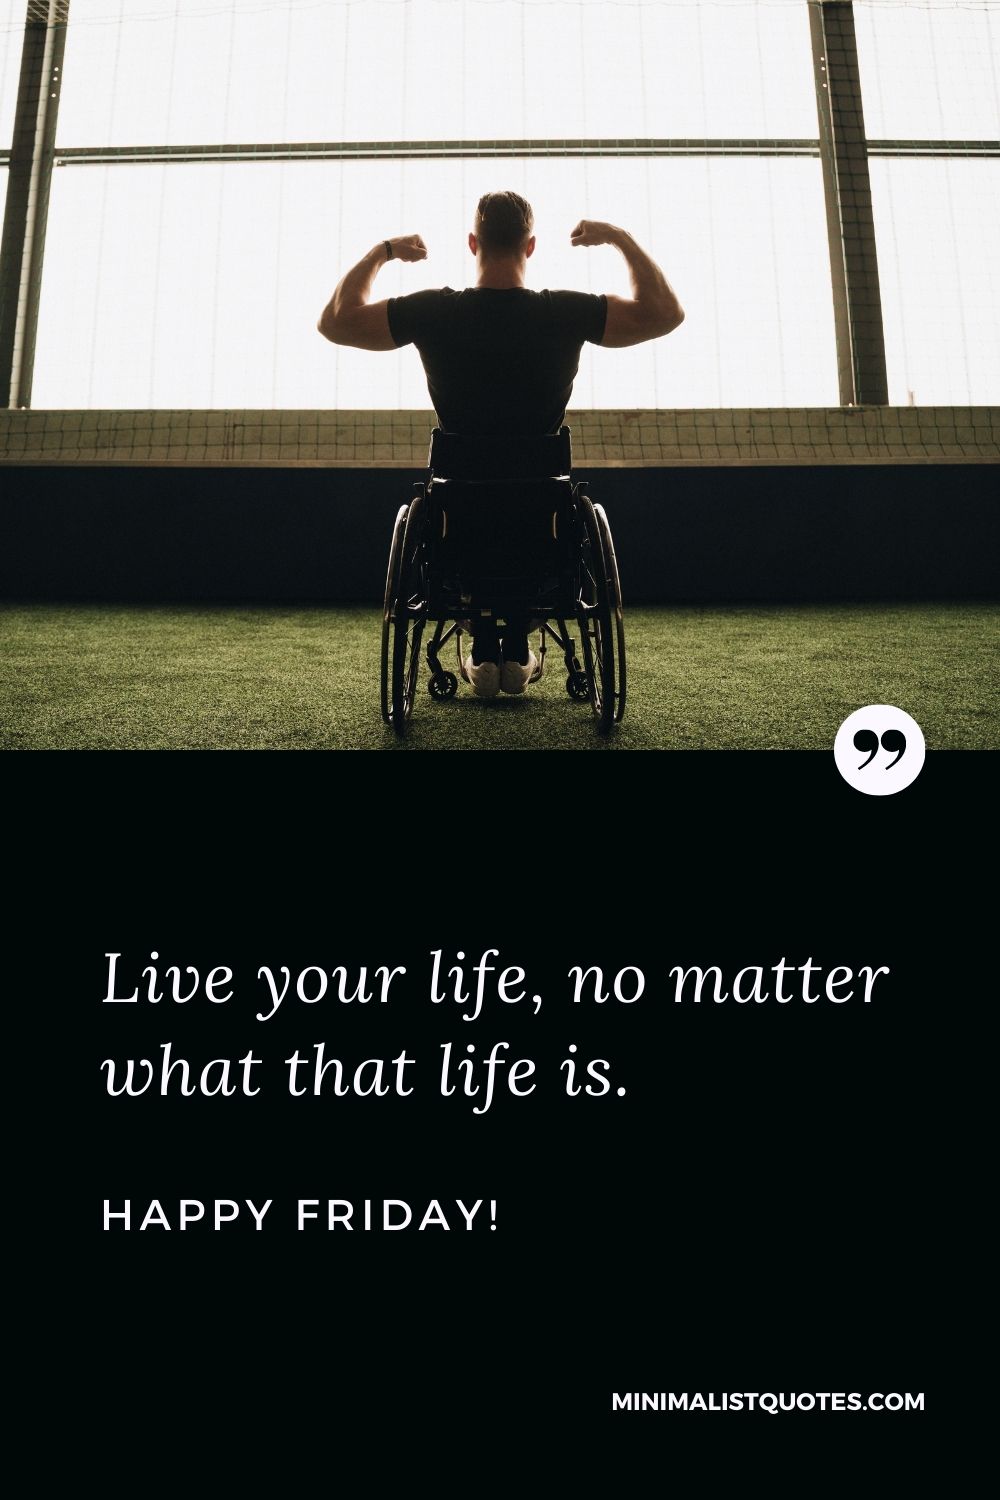 Friday Quote, Wish & Message With Image: Live your life, no matter what that life is. Happy Friday!